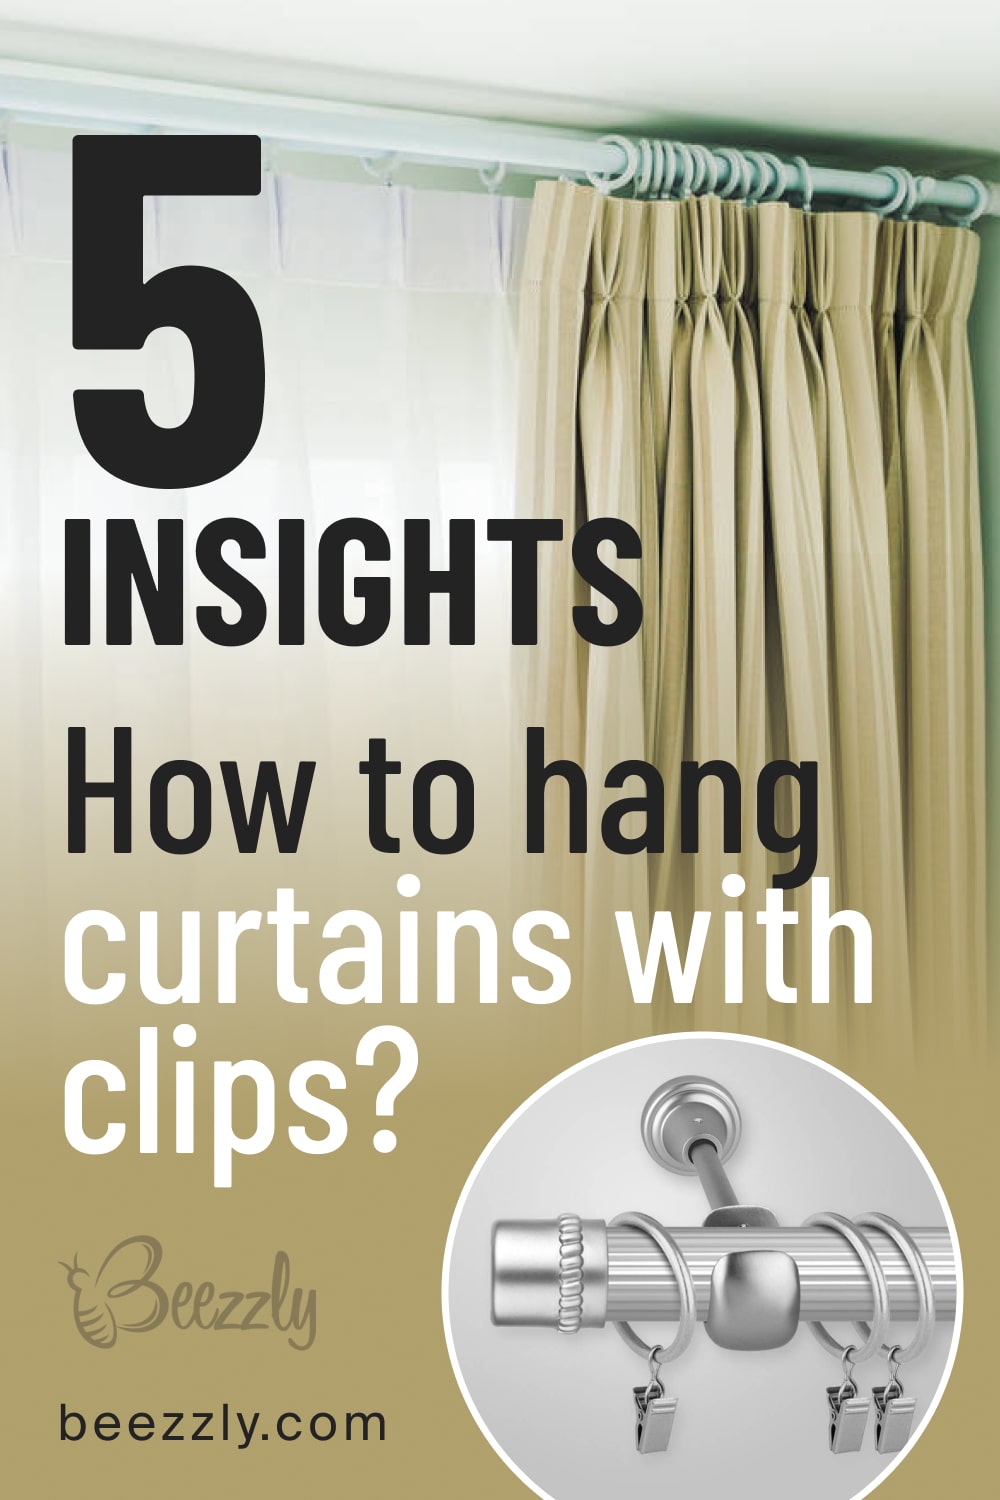 5 insights. How to hang curtains with clips